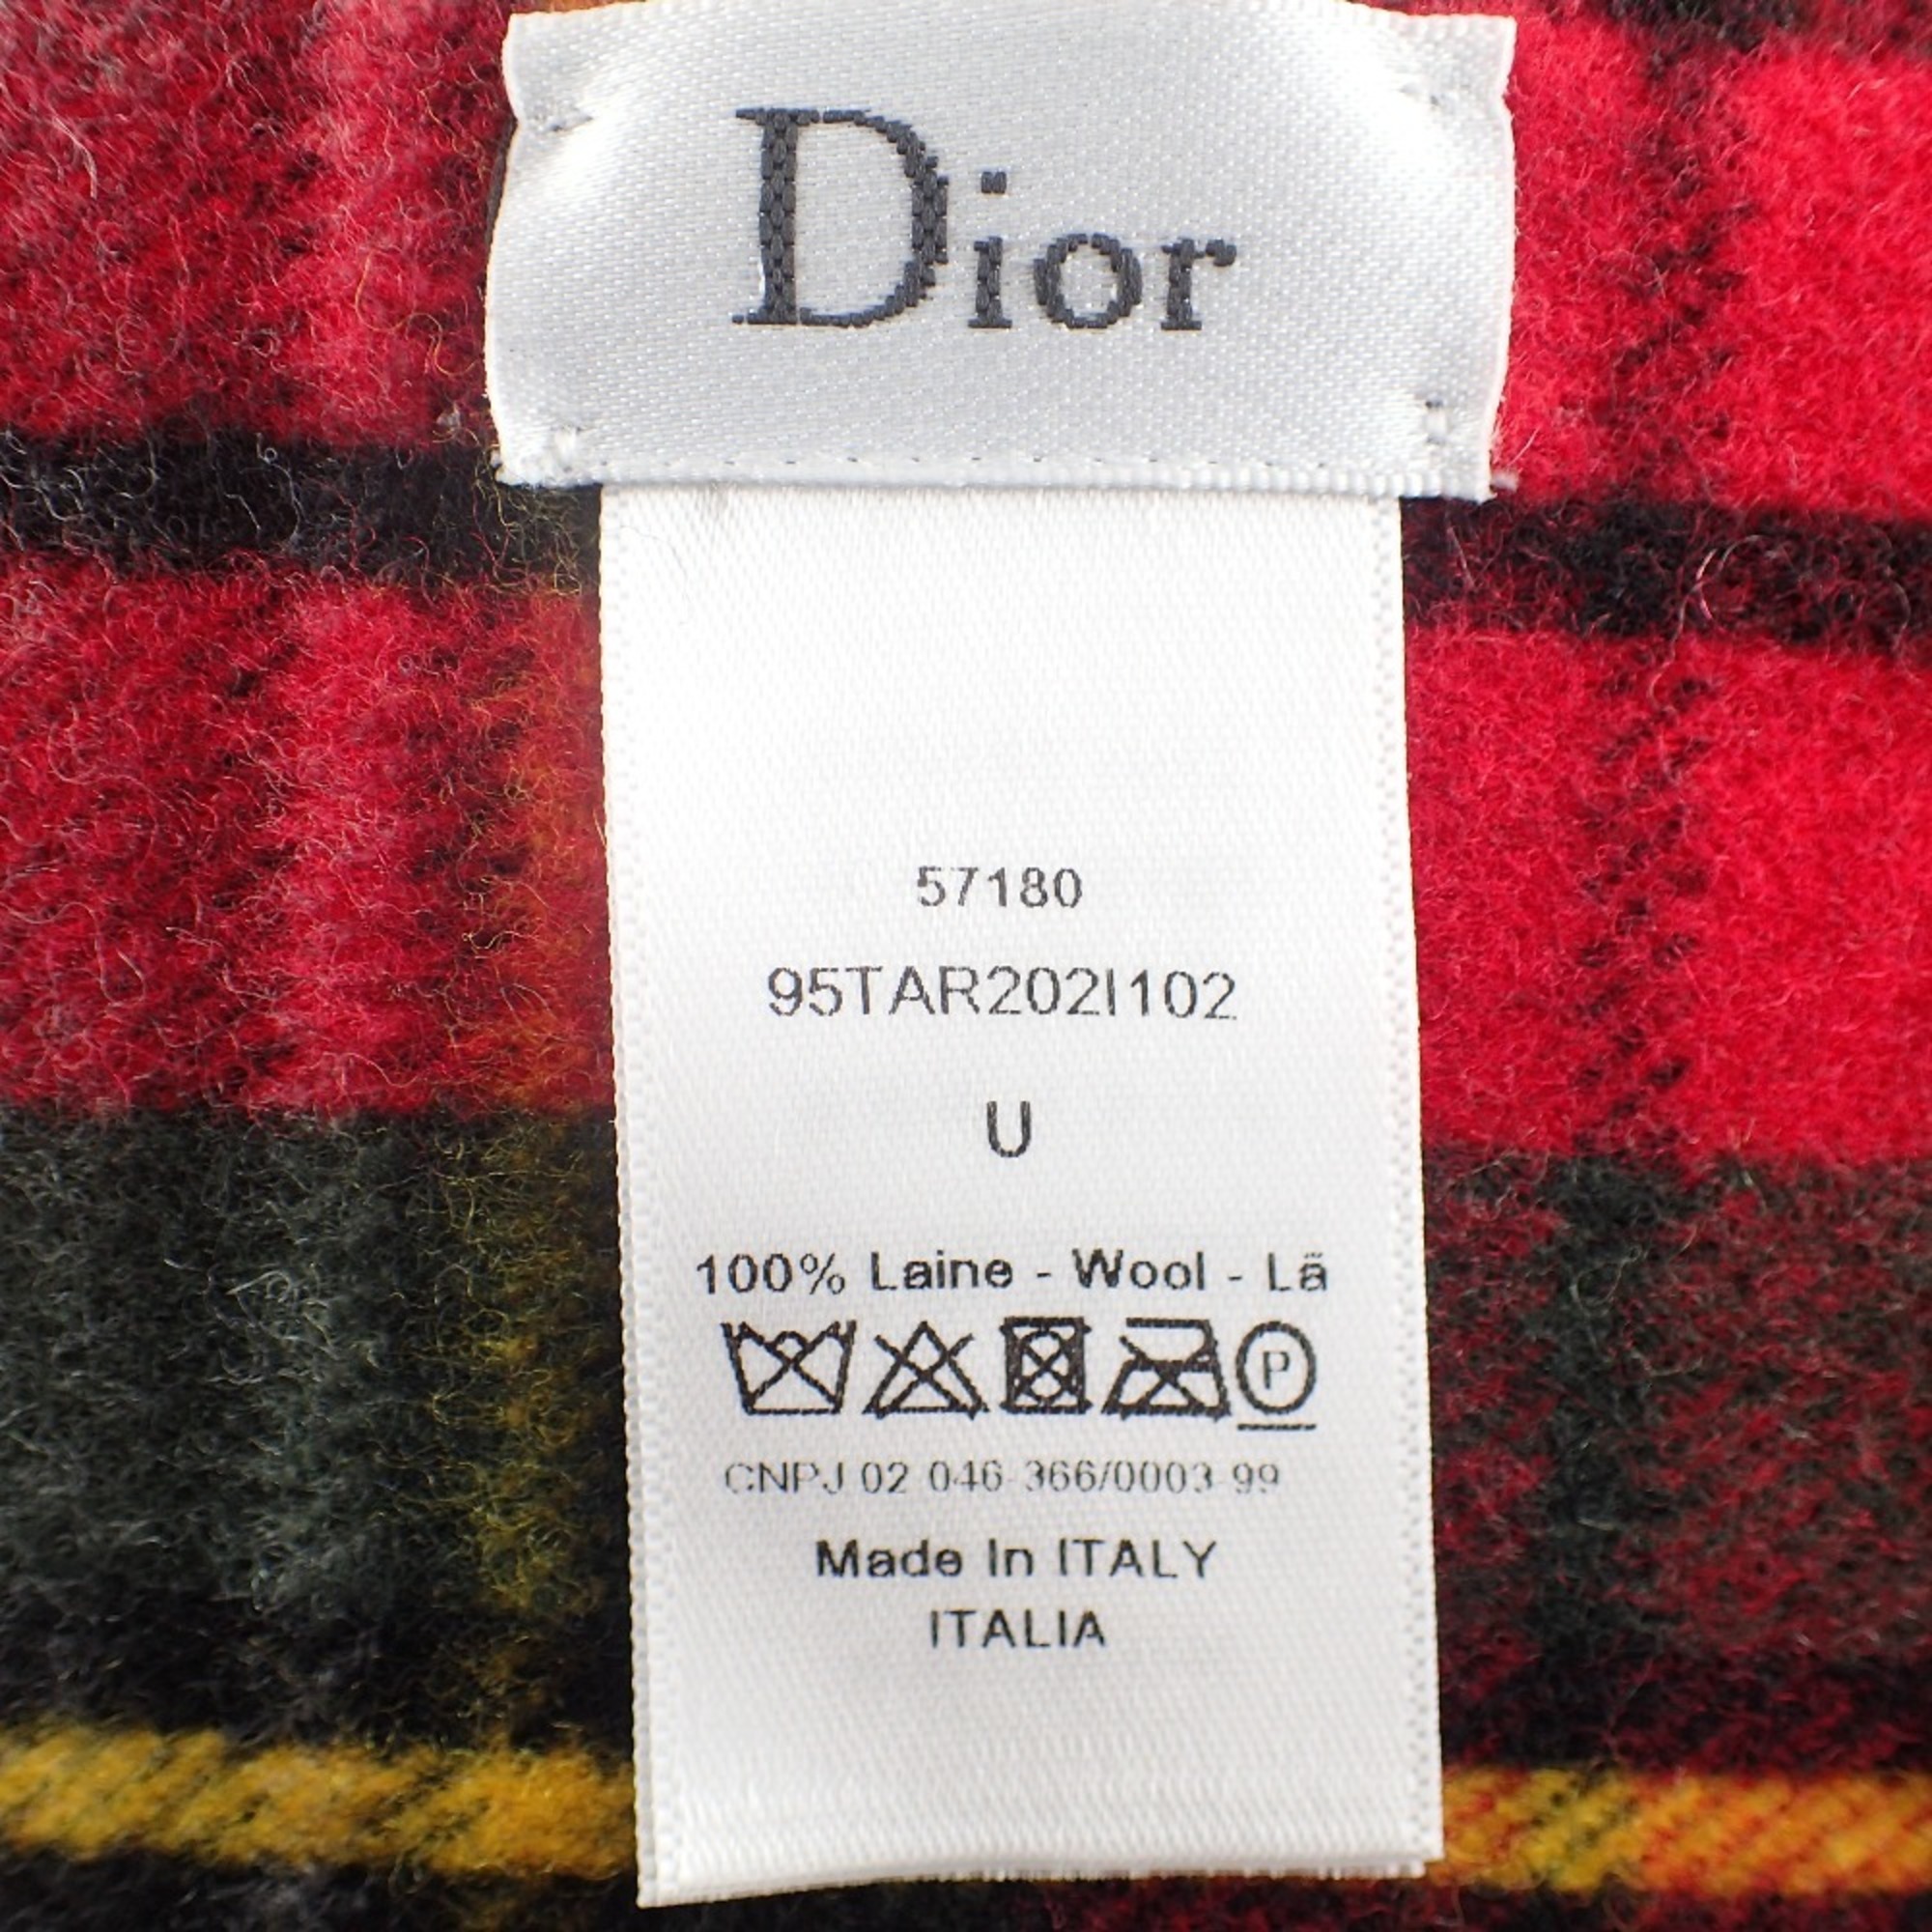 Christian Dior 95TAR202I102 Checkered Scarf Red Women's